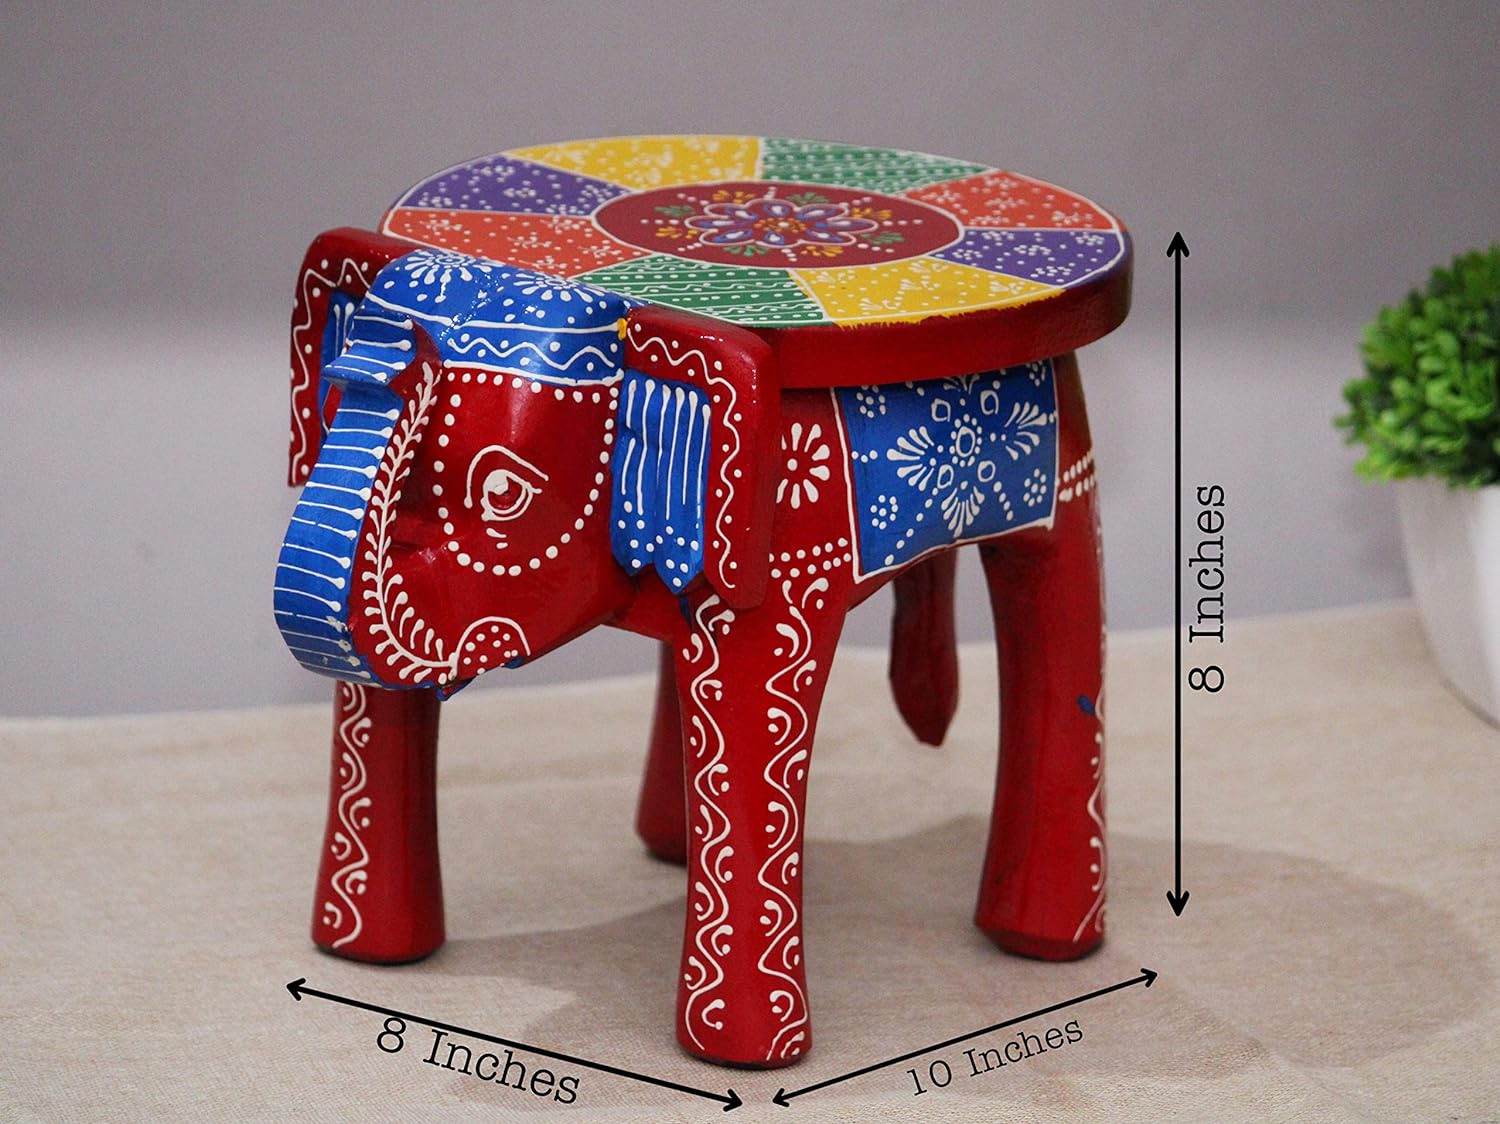 Hand-Painted Colorful Wooden Elephant Stool (Red)